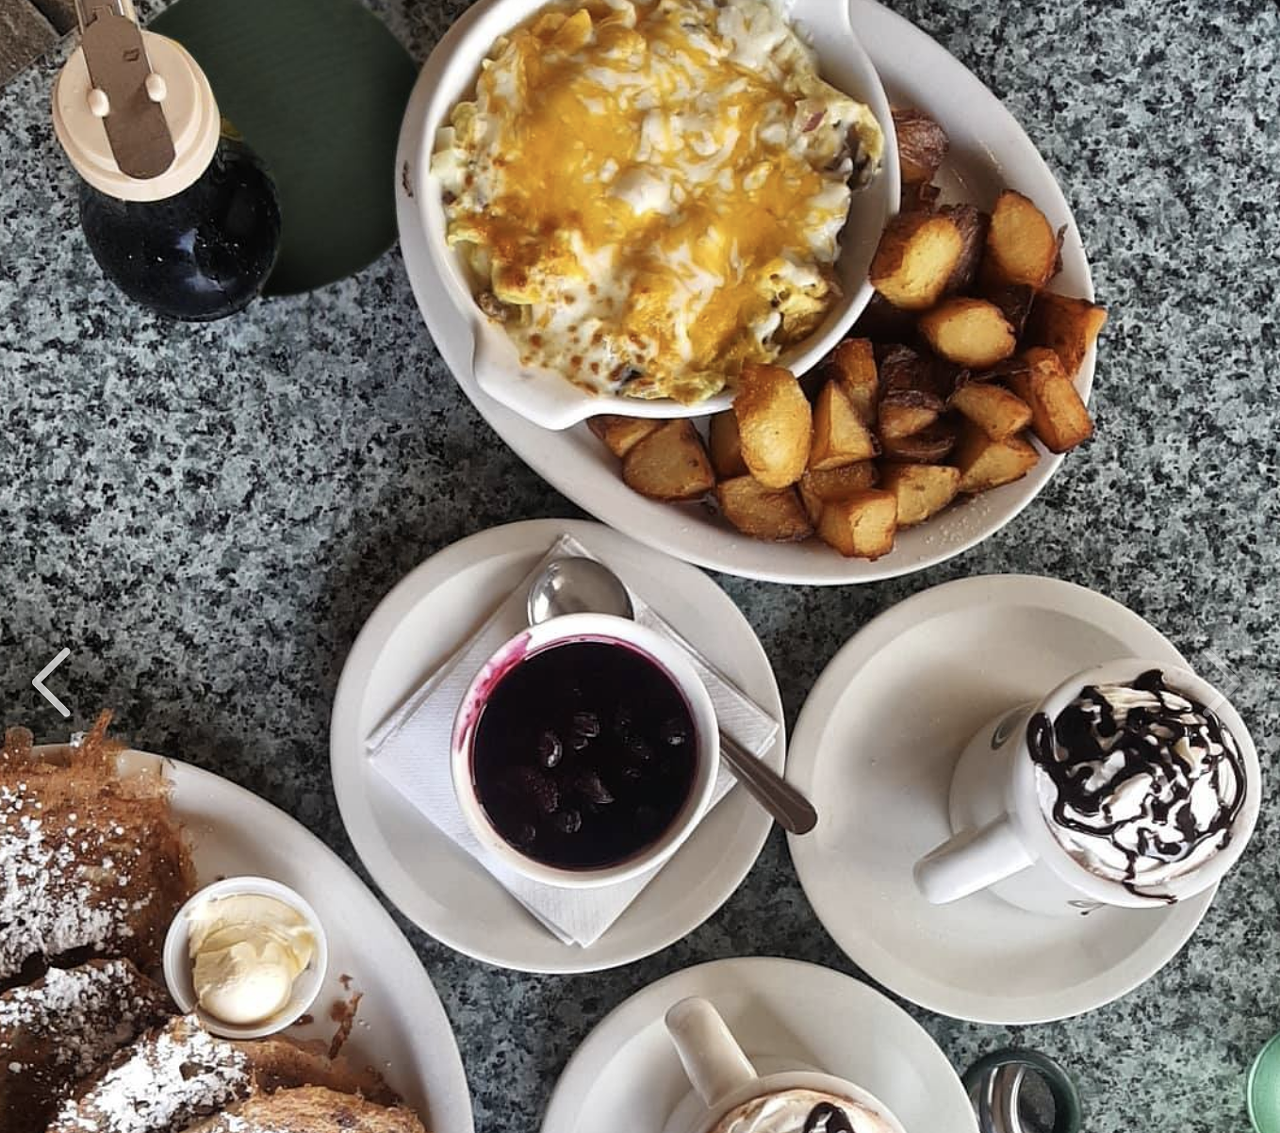 Metro Diner
Locations: All over Florida, and the South
Metro Diner is quickly becoming one of Florida's biggest exports. The chicken and waffle purveyors got their start in Tampa and now they're pretty much everywhere.
Photo via Kahwa/Facebook